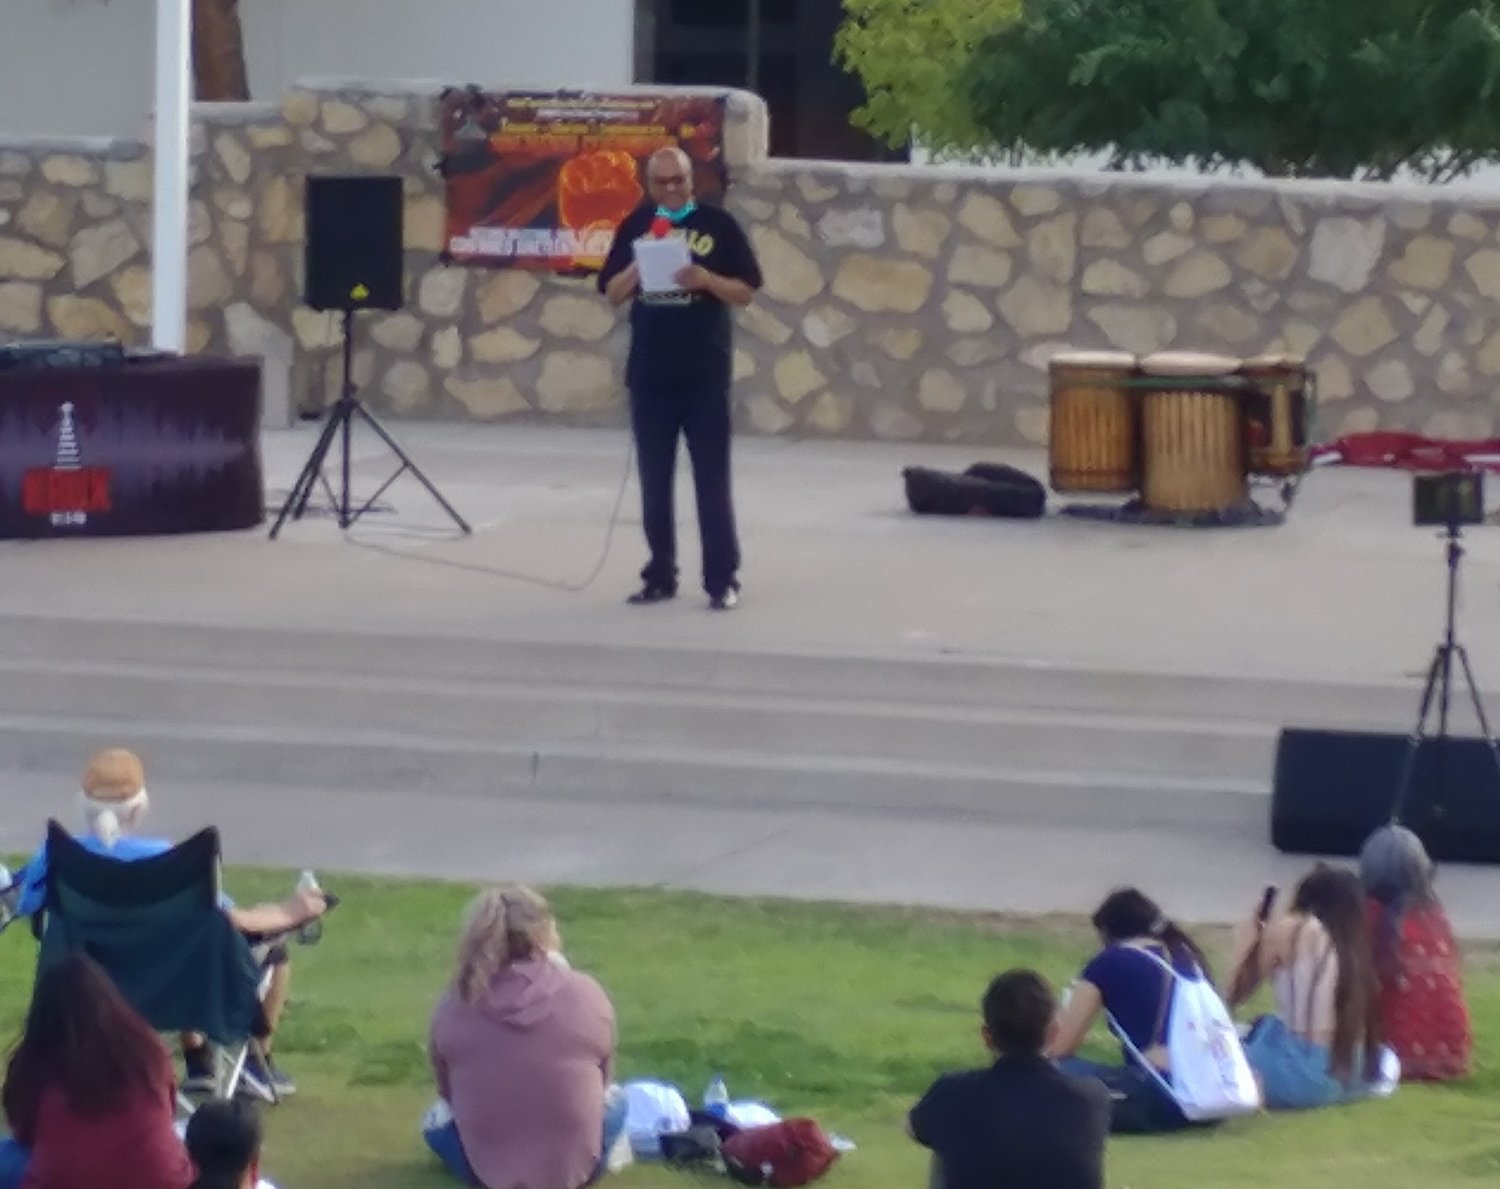 NMSU general counsel Roy Collins III speaking at the June 17 Juneteenth celebration at NMSU.